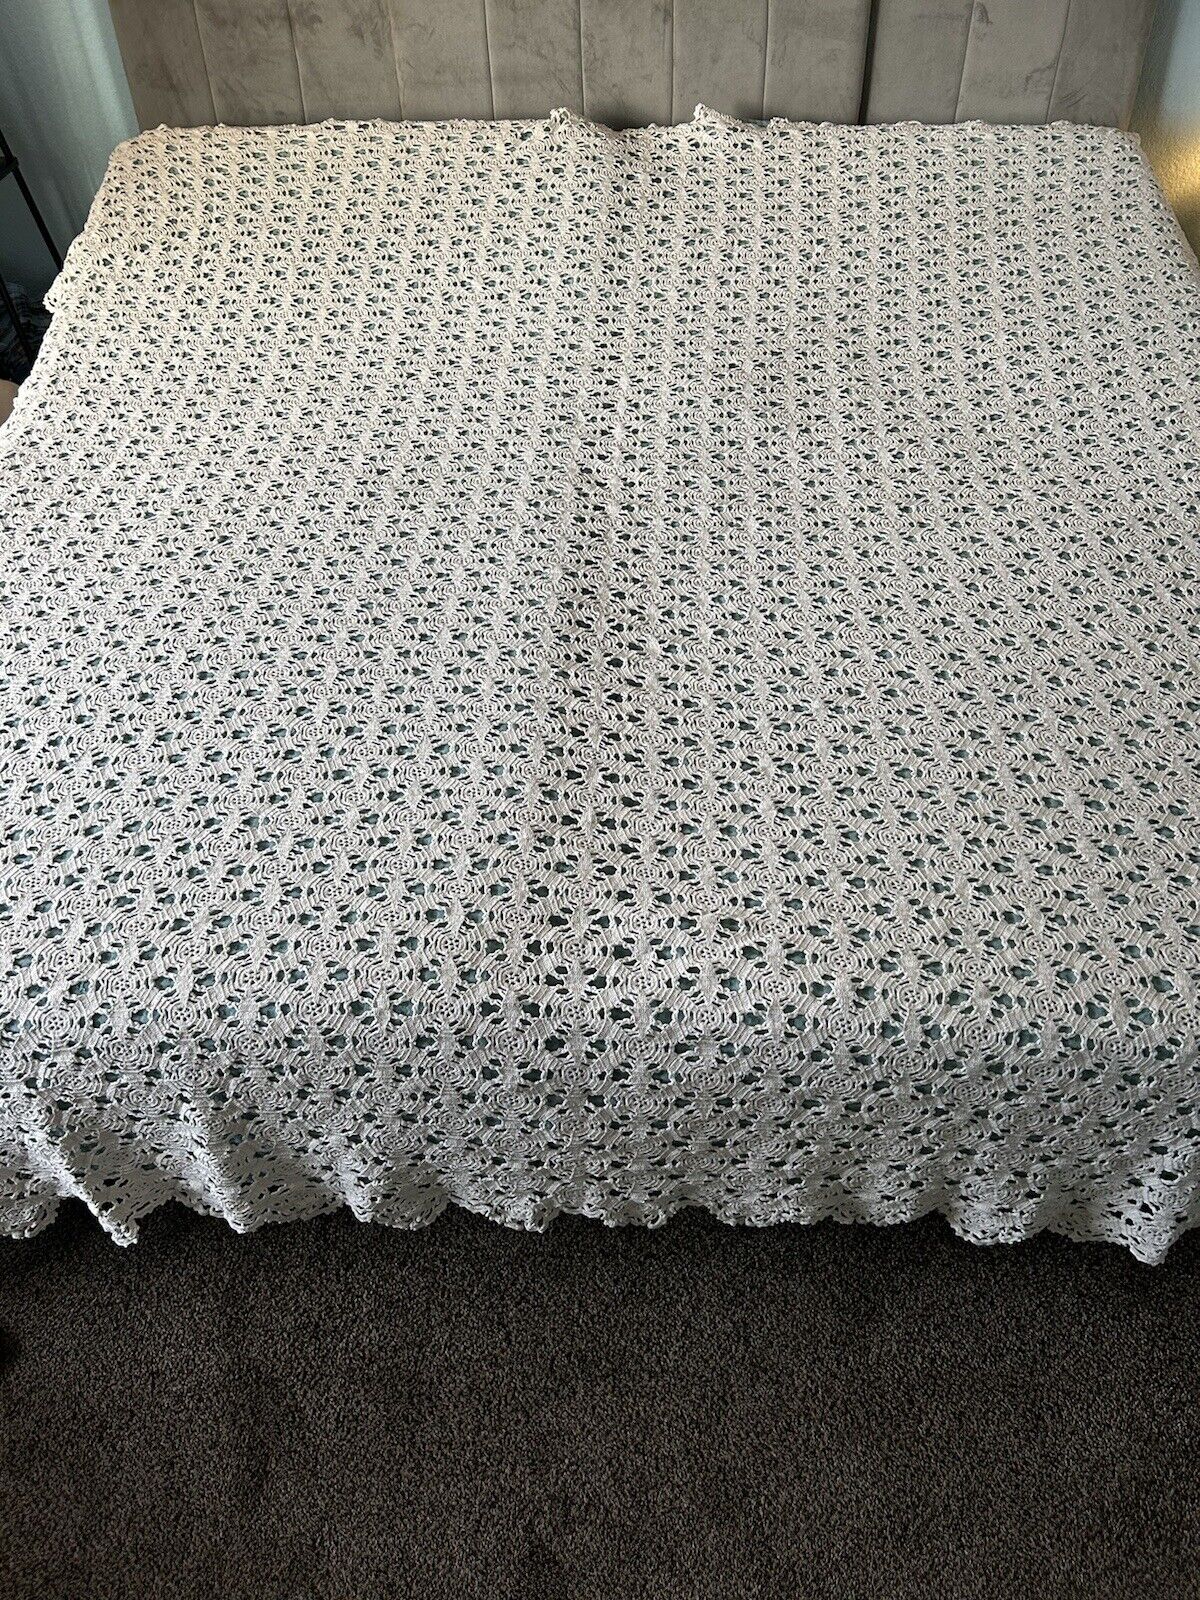 Crochet Thick Bedspread 78”x 94” Off White Beautiful No Flaws No Stains Preowned